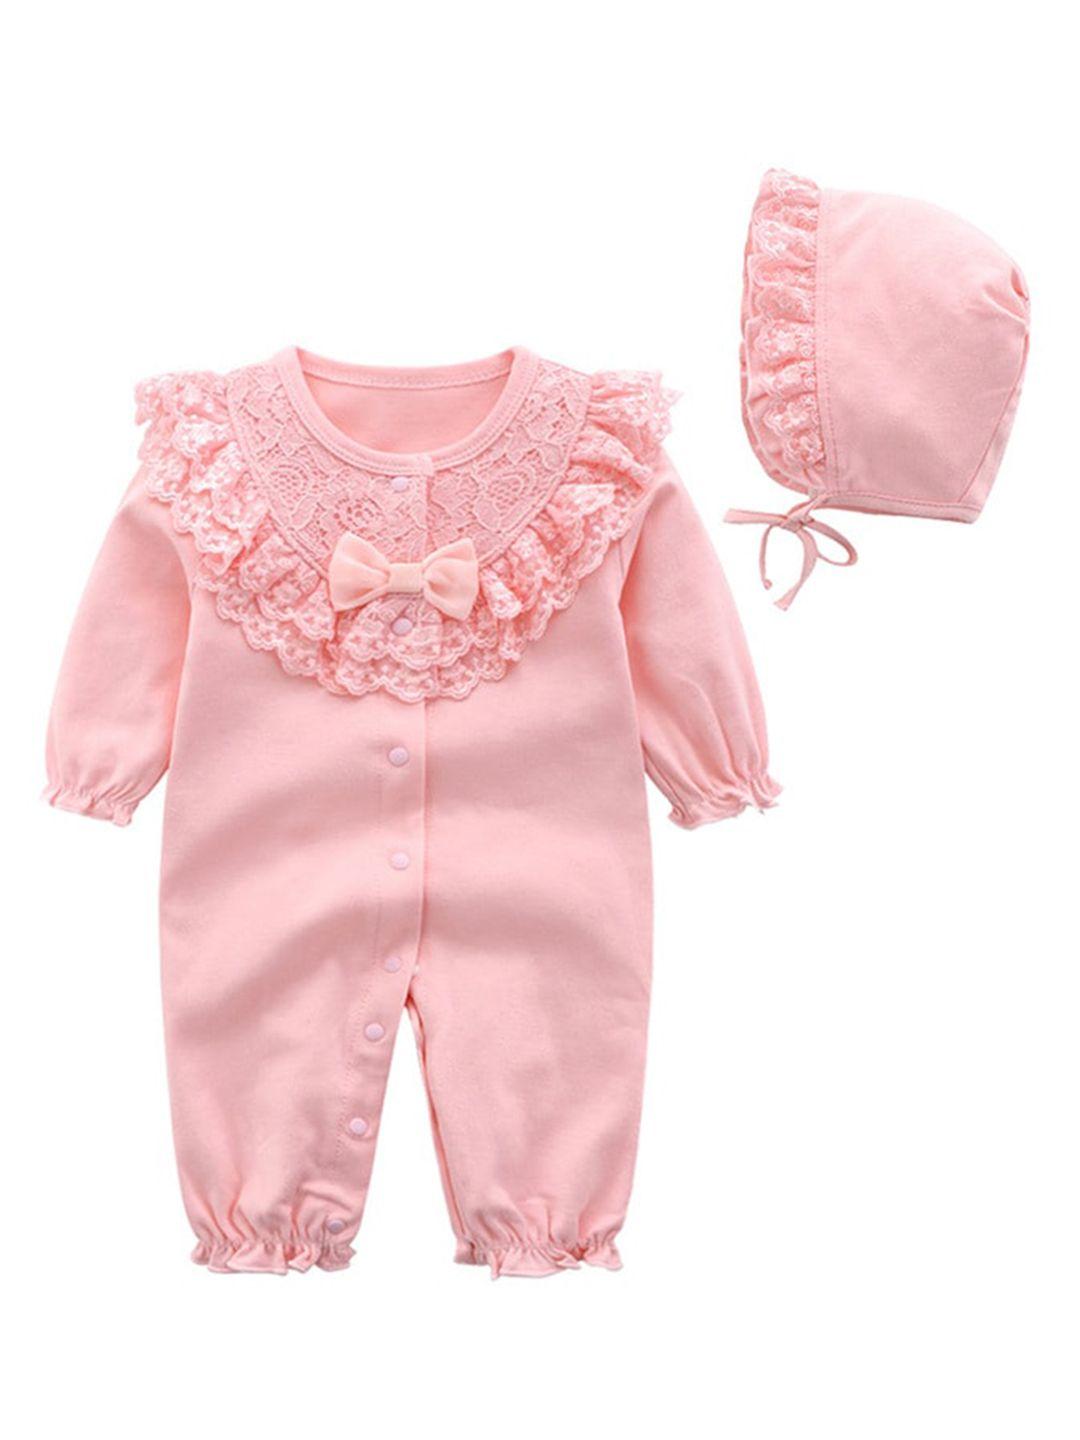 stylecast-infant-girls-pink-self-design-cotton-rompers-with-hat